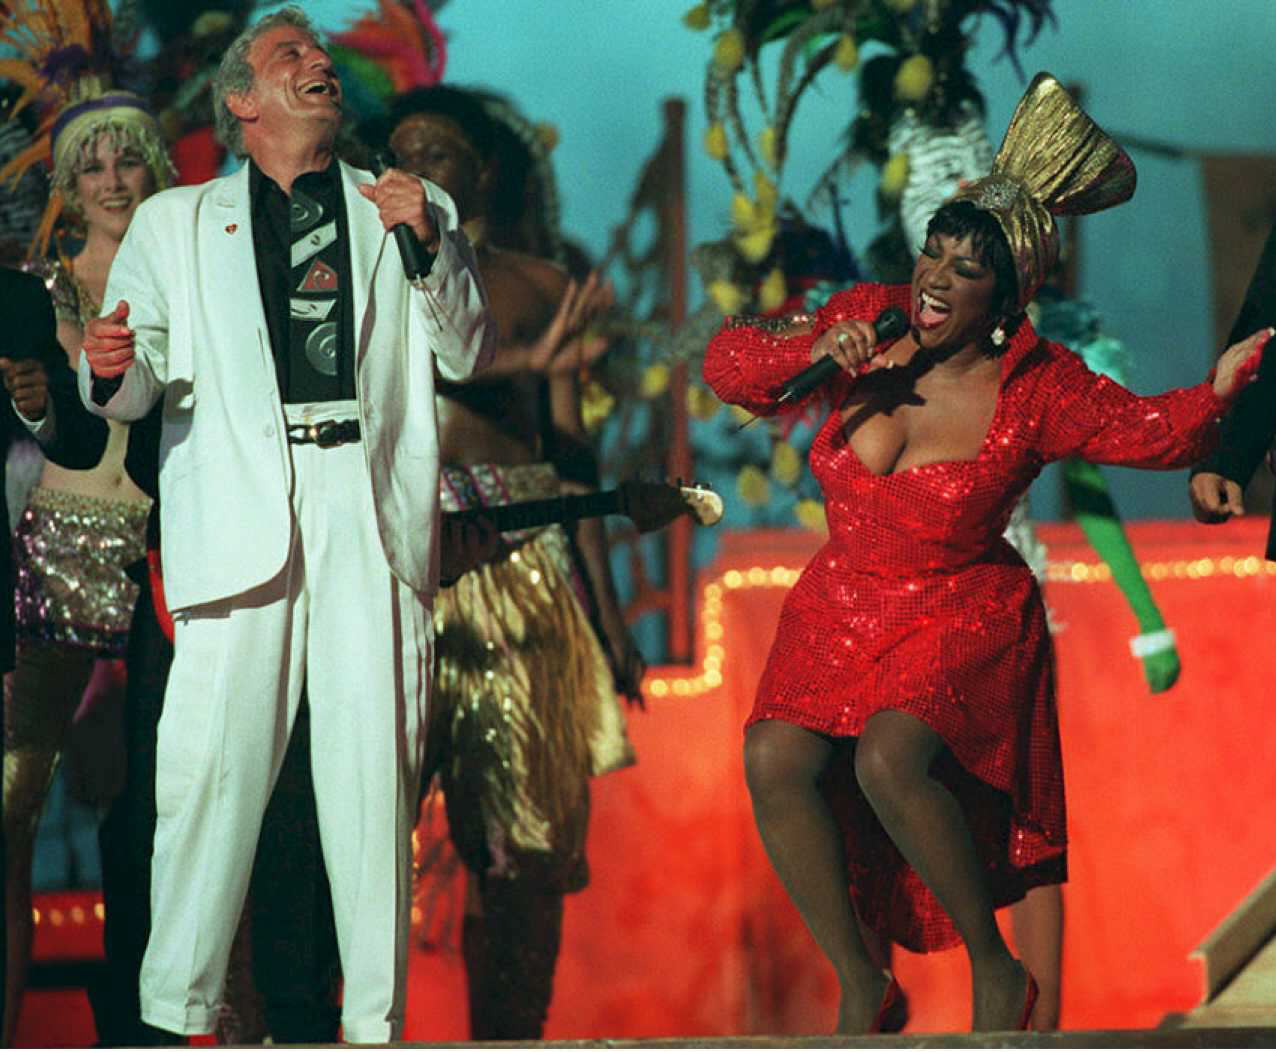 Tony Bennett and Patti LaBelle during Super Bowl XXIX in Miami on Jan. 29, 1995.